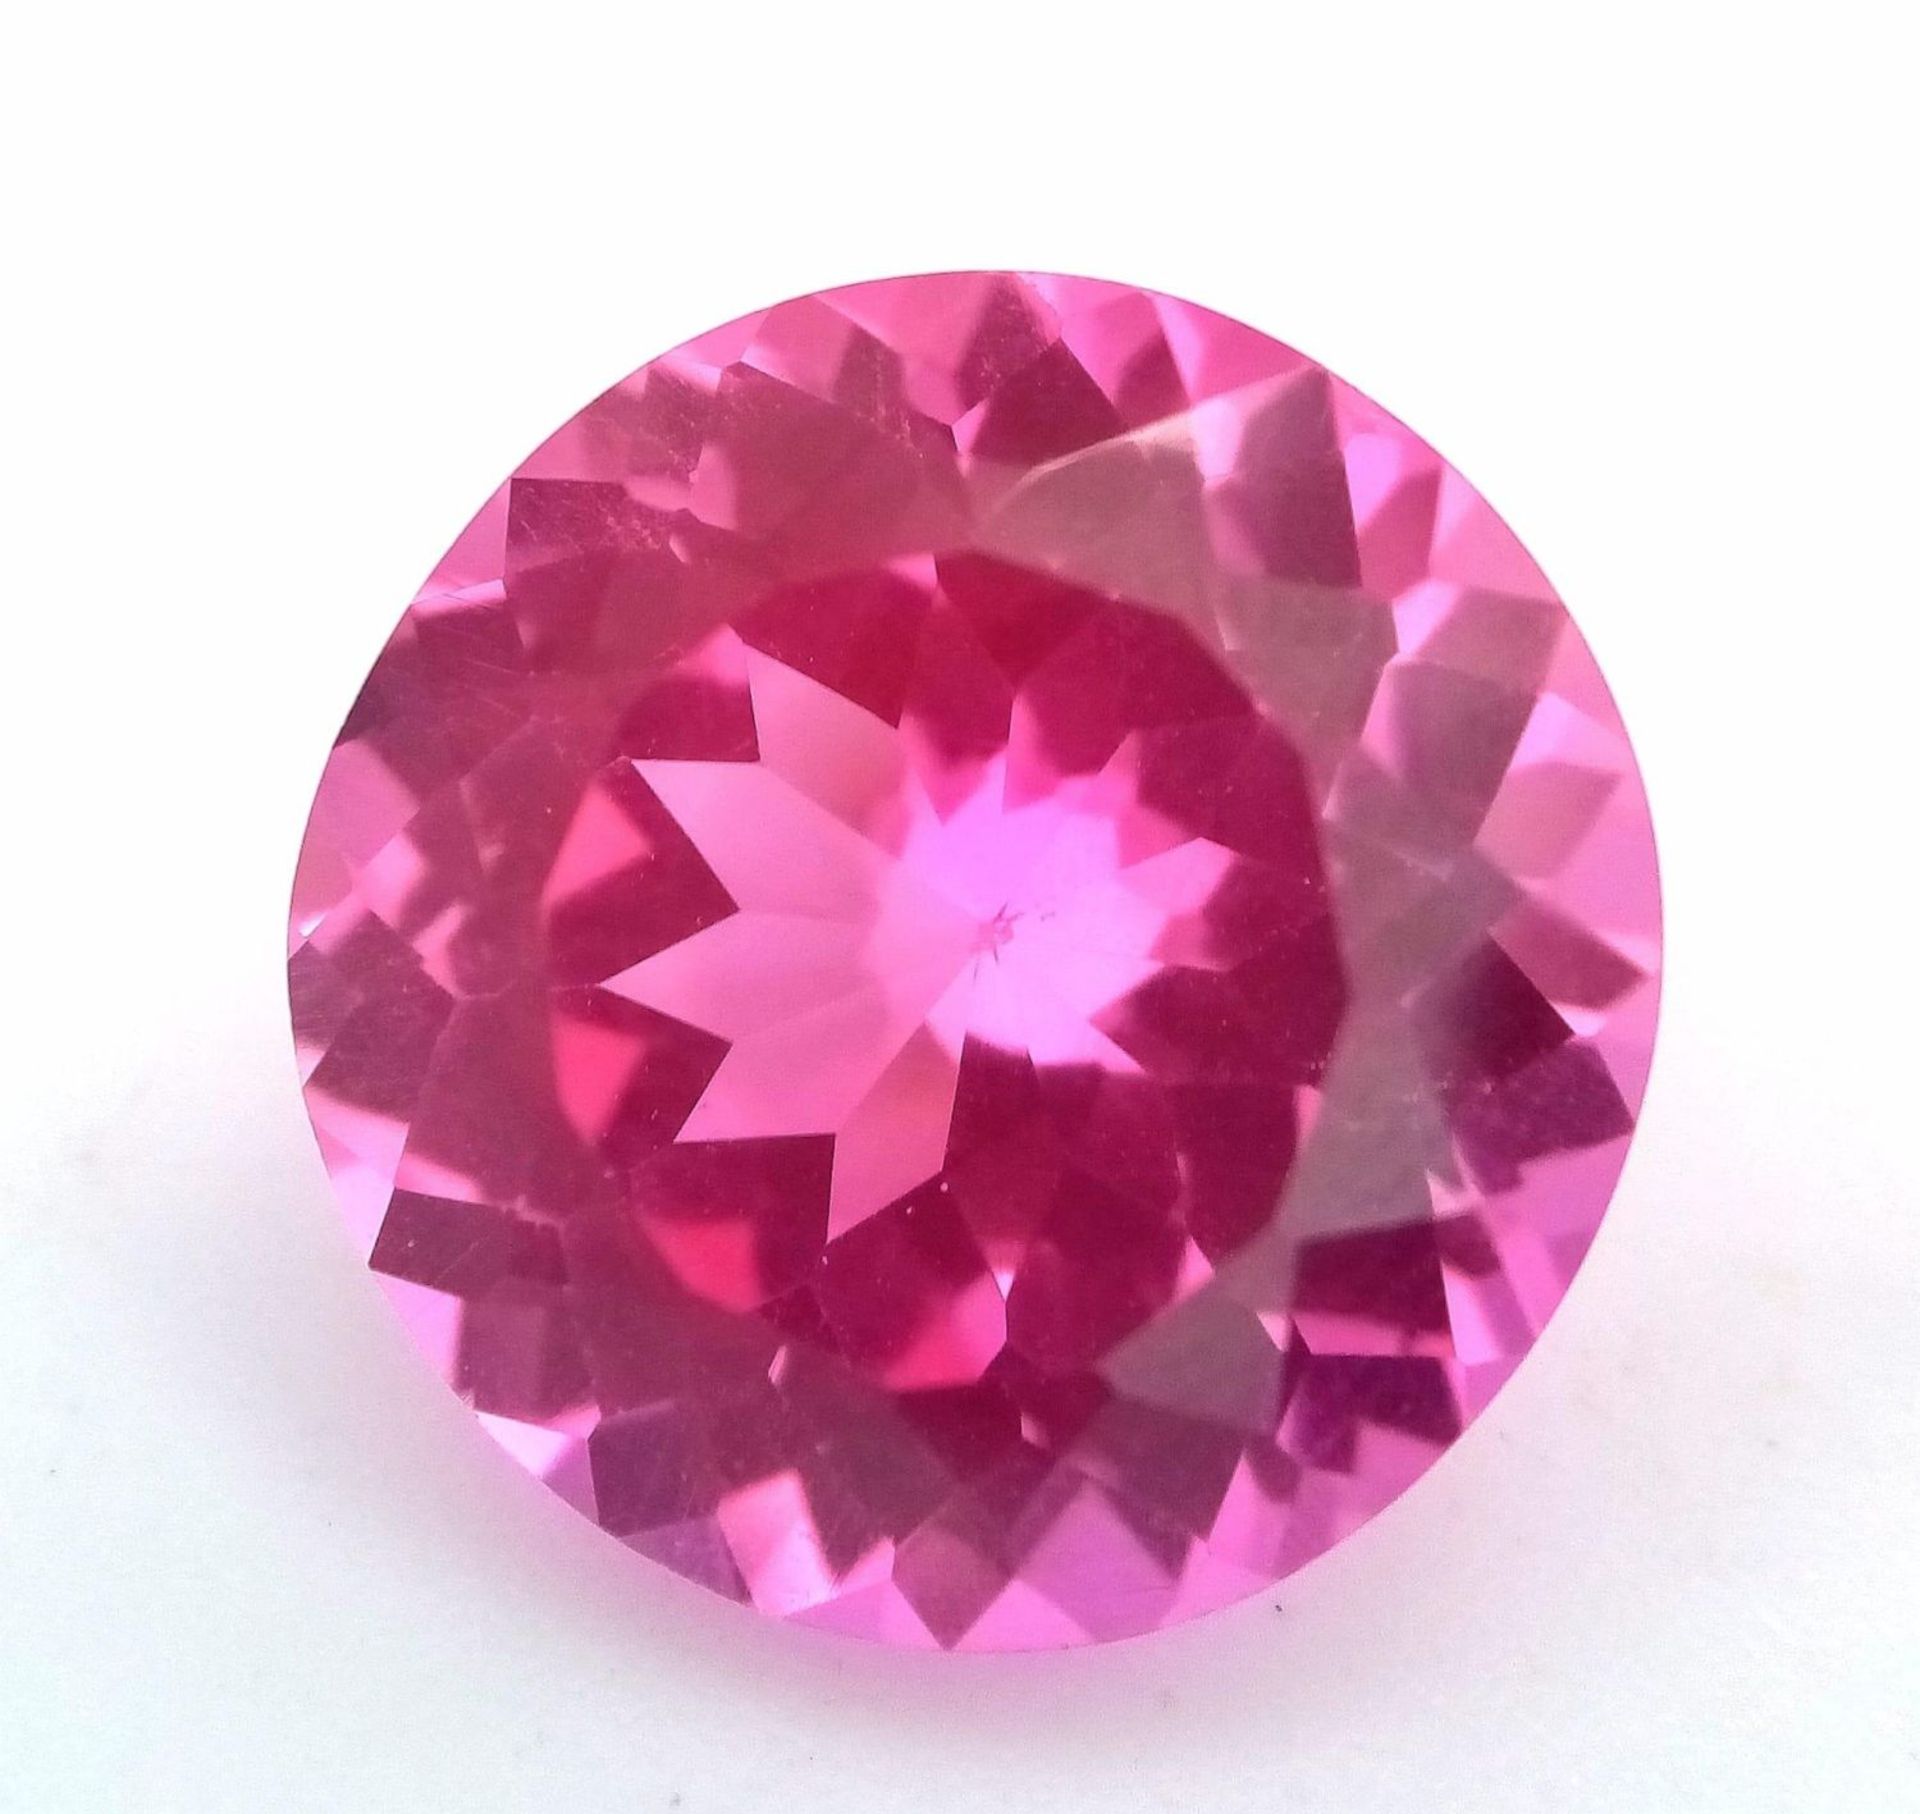 A Beautiful 18ct Pink Kunzite Gemstone. Round cut. No visible marks or inclusions. No certificate so - Image 3 of 4